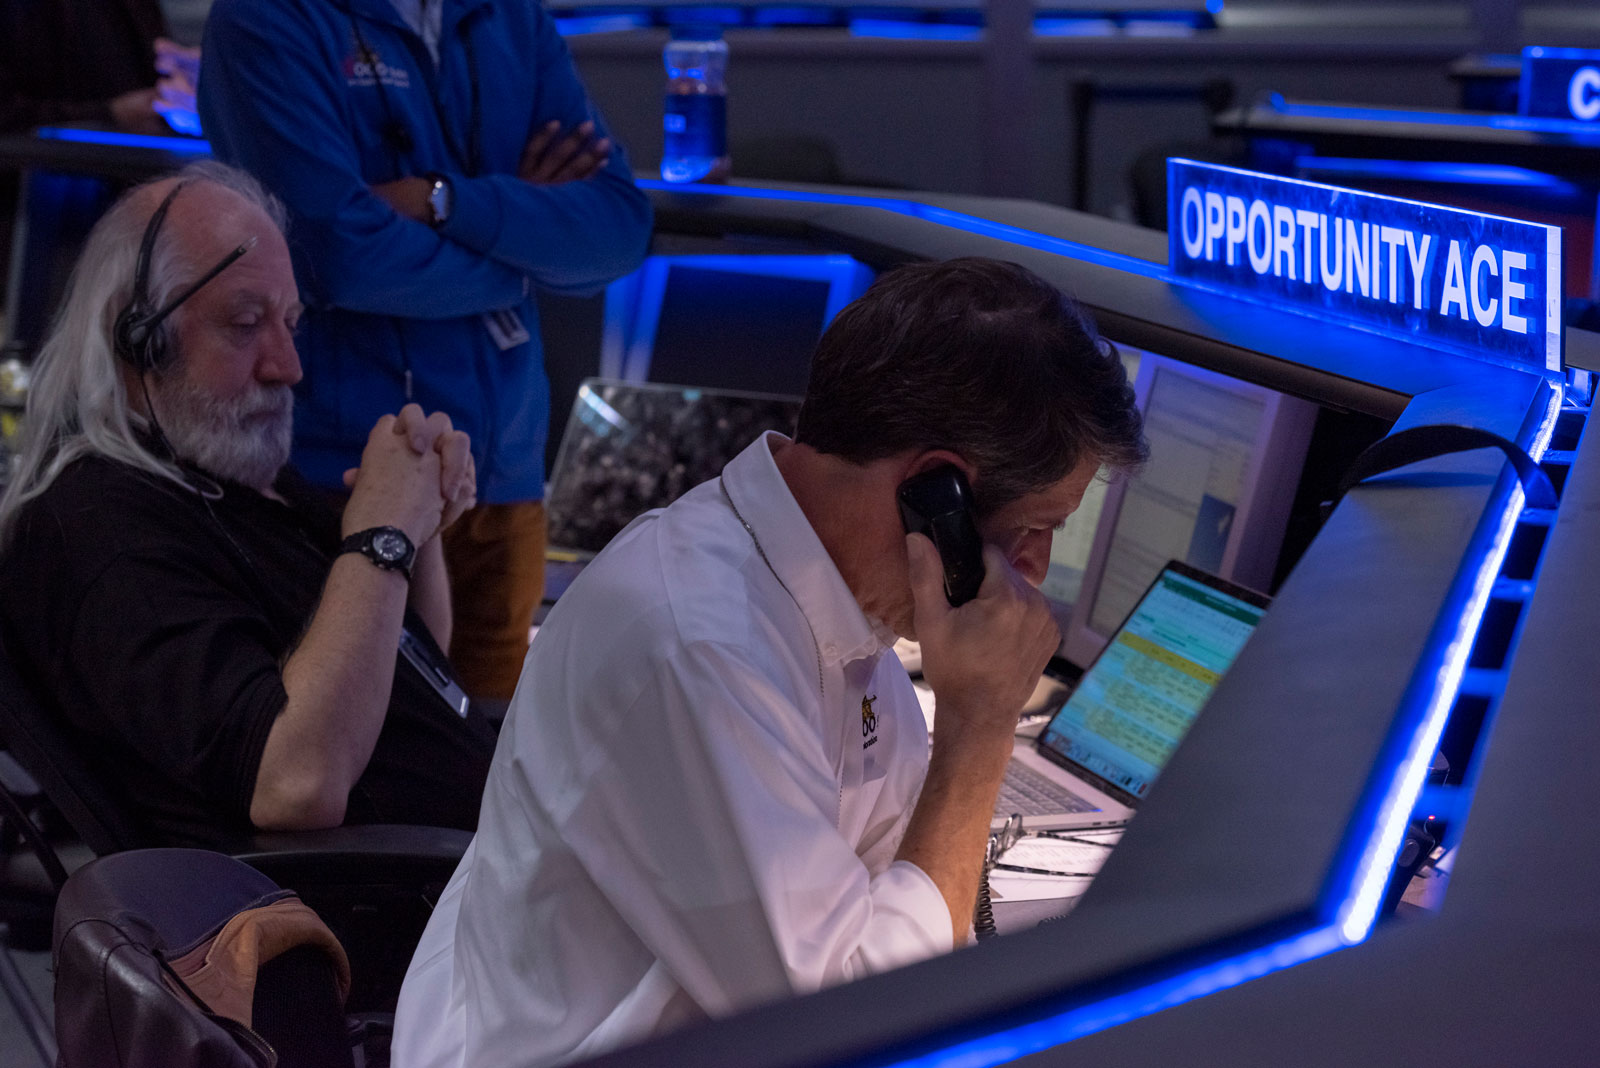 John Callas, project manager for NASA’s Mars Exploration Rovers mission, makes the call ending the last formal session via NASA’s Deep Space Network (DSN) for the Opportunity rover at Mars on Feb. 12, 2019. 